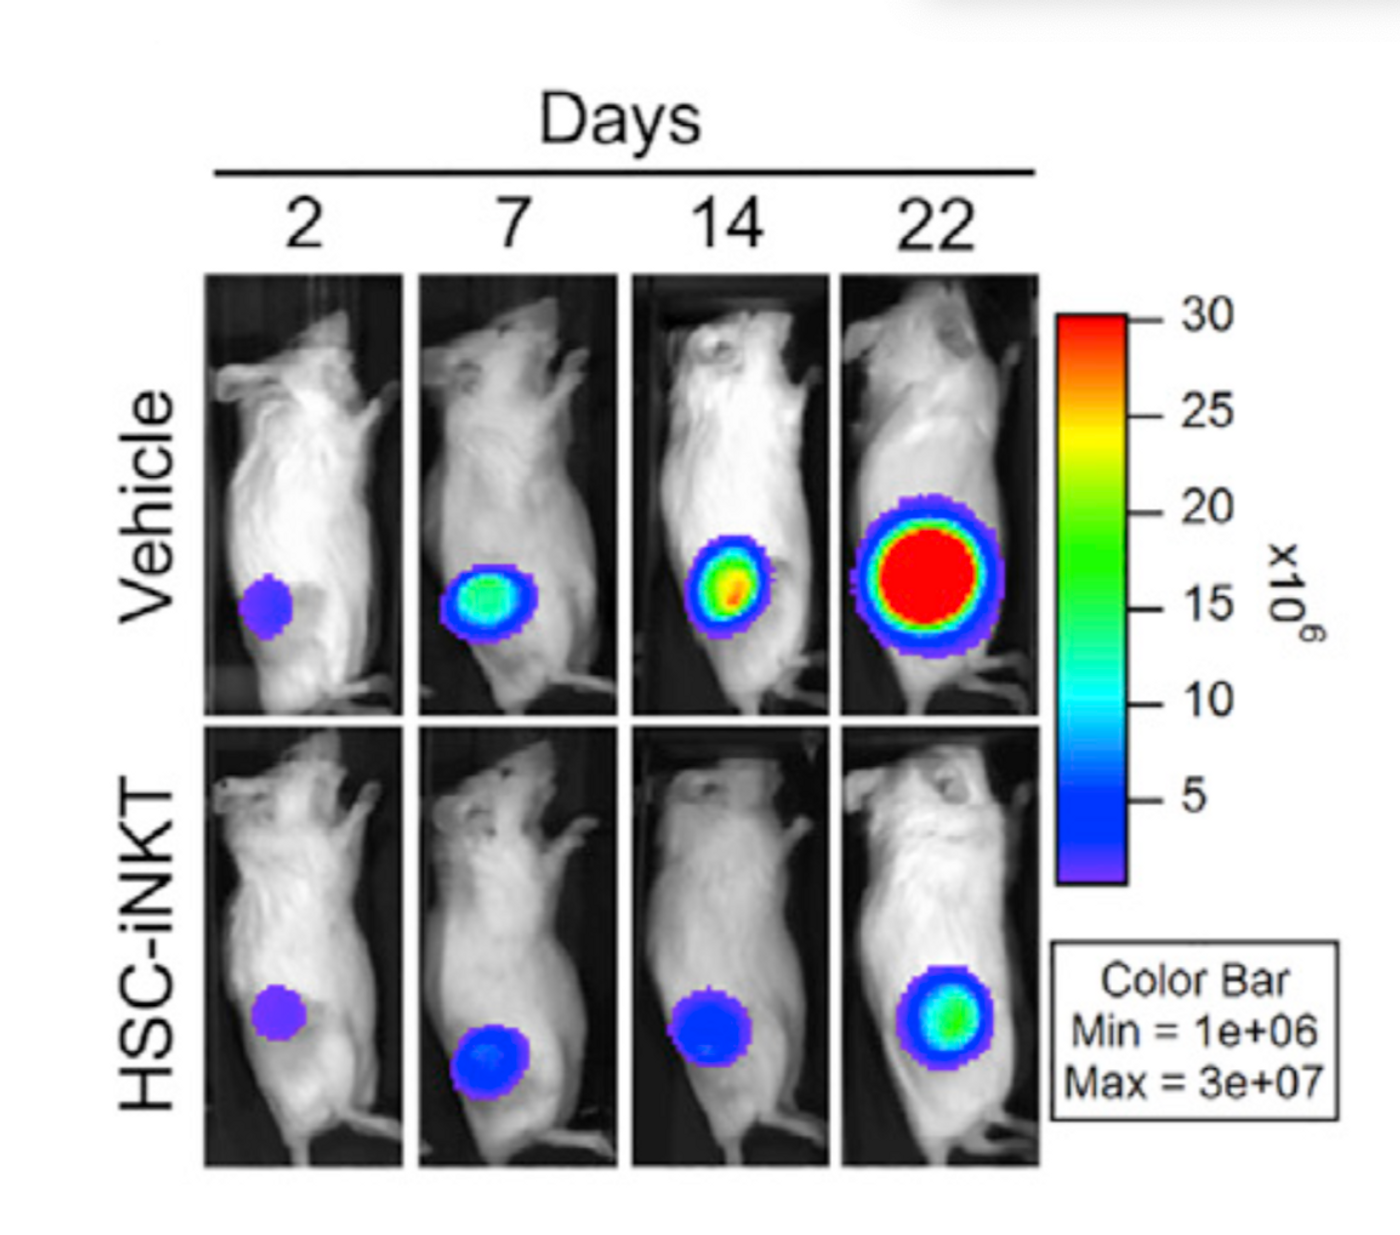 In the mice treated with HSC-iNKT cells (bottom row), the tumor growth and size was significantly reduced compared to the untreated mice (top row). This is shown by bioluminscence live animal imaging where the colored areas show the tumor. The color grade shows the amount of cells within the tumor (bright red meaning high number of tumor cells and so on).